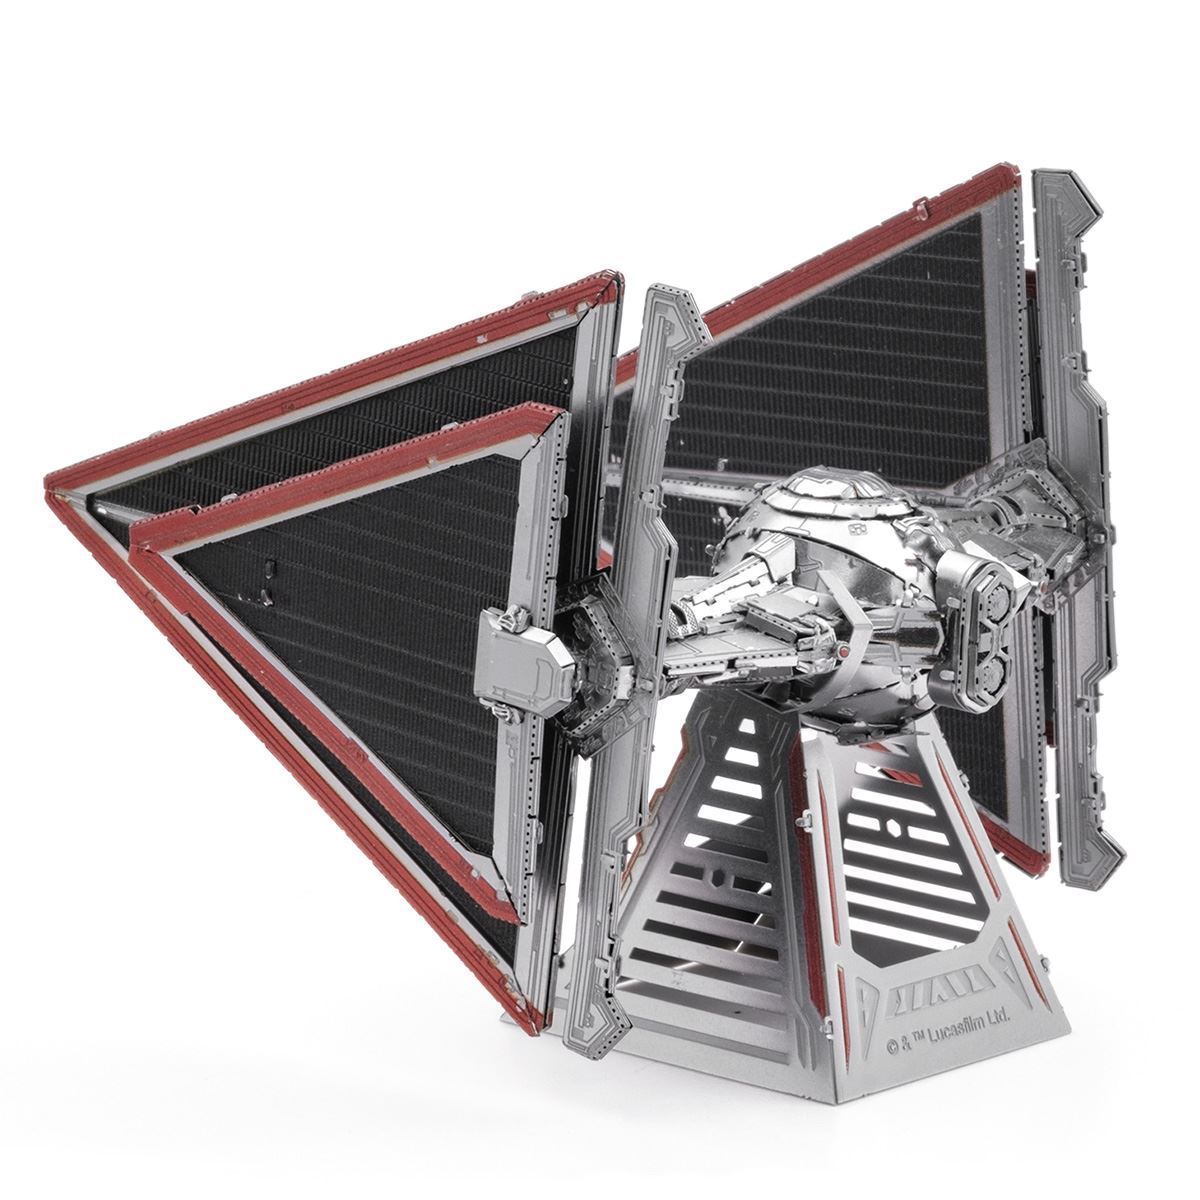 Fascinations Star Wars Sith Tie Fighter Metal Earth 3D Model New MMS417 